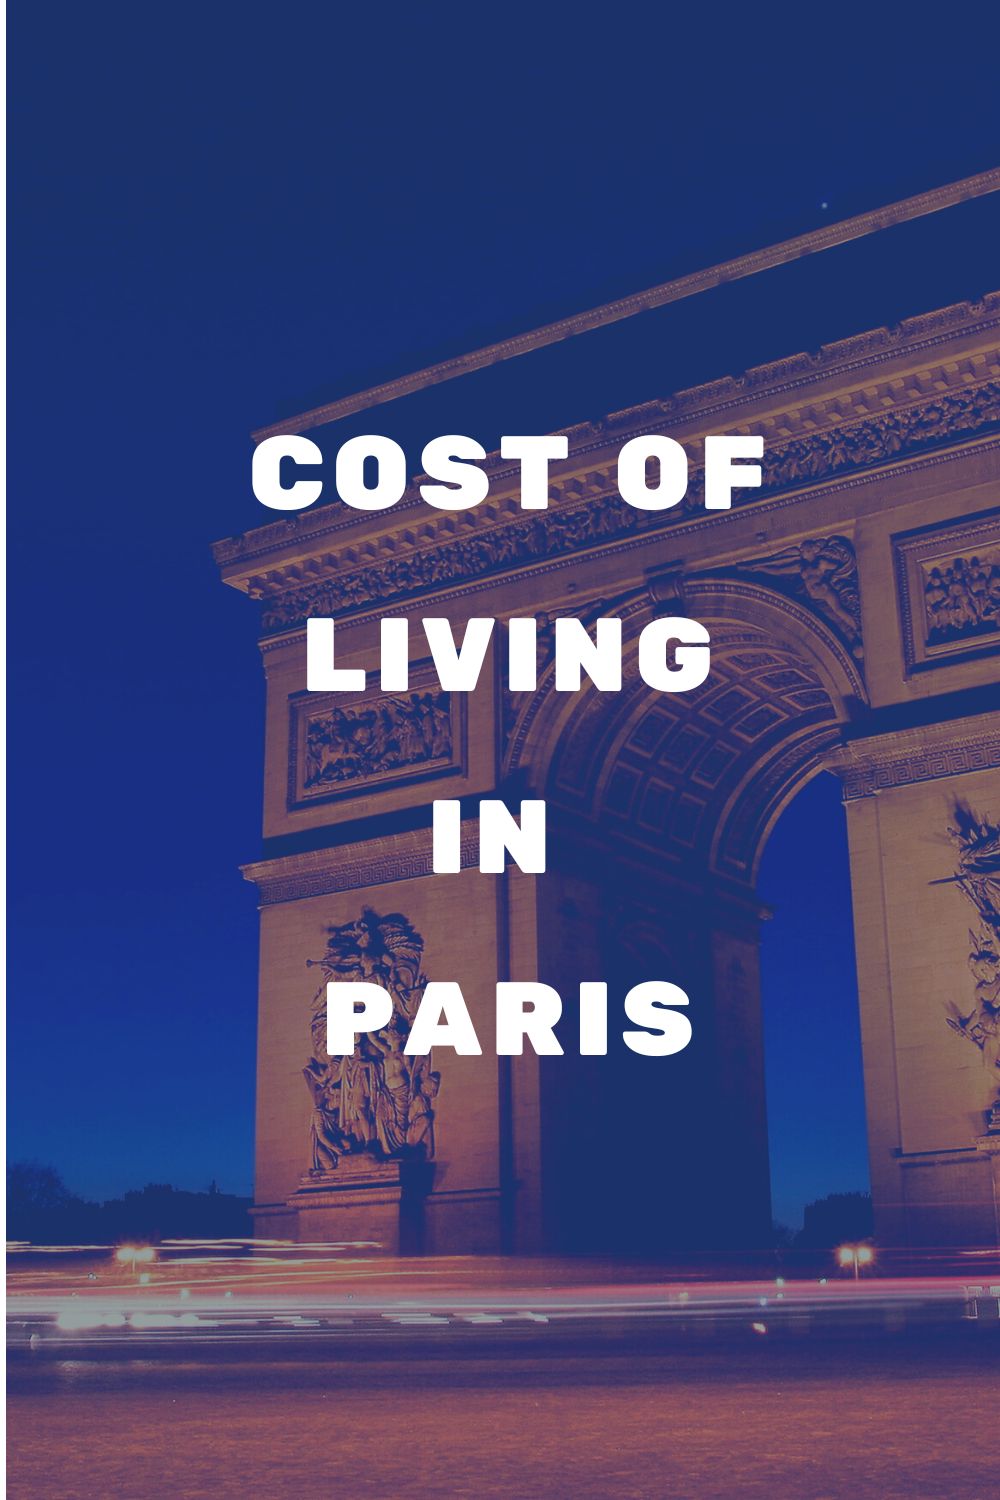 How much does it cost to live in Paris?